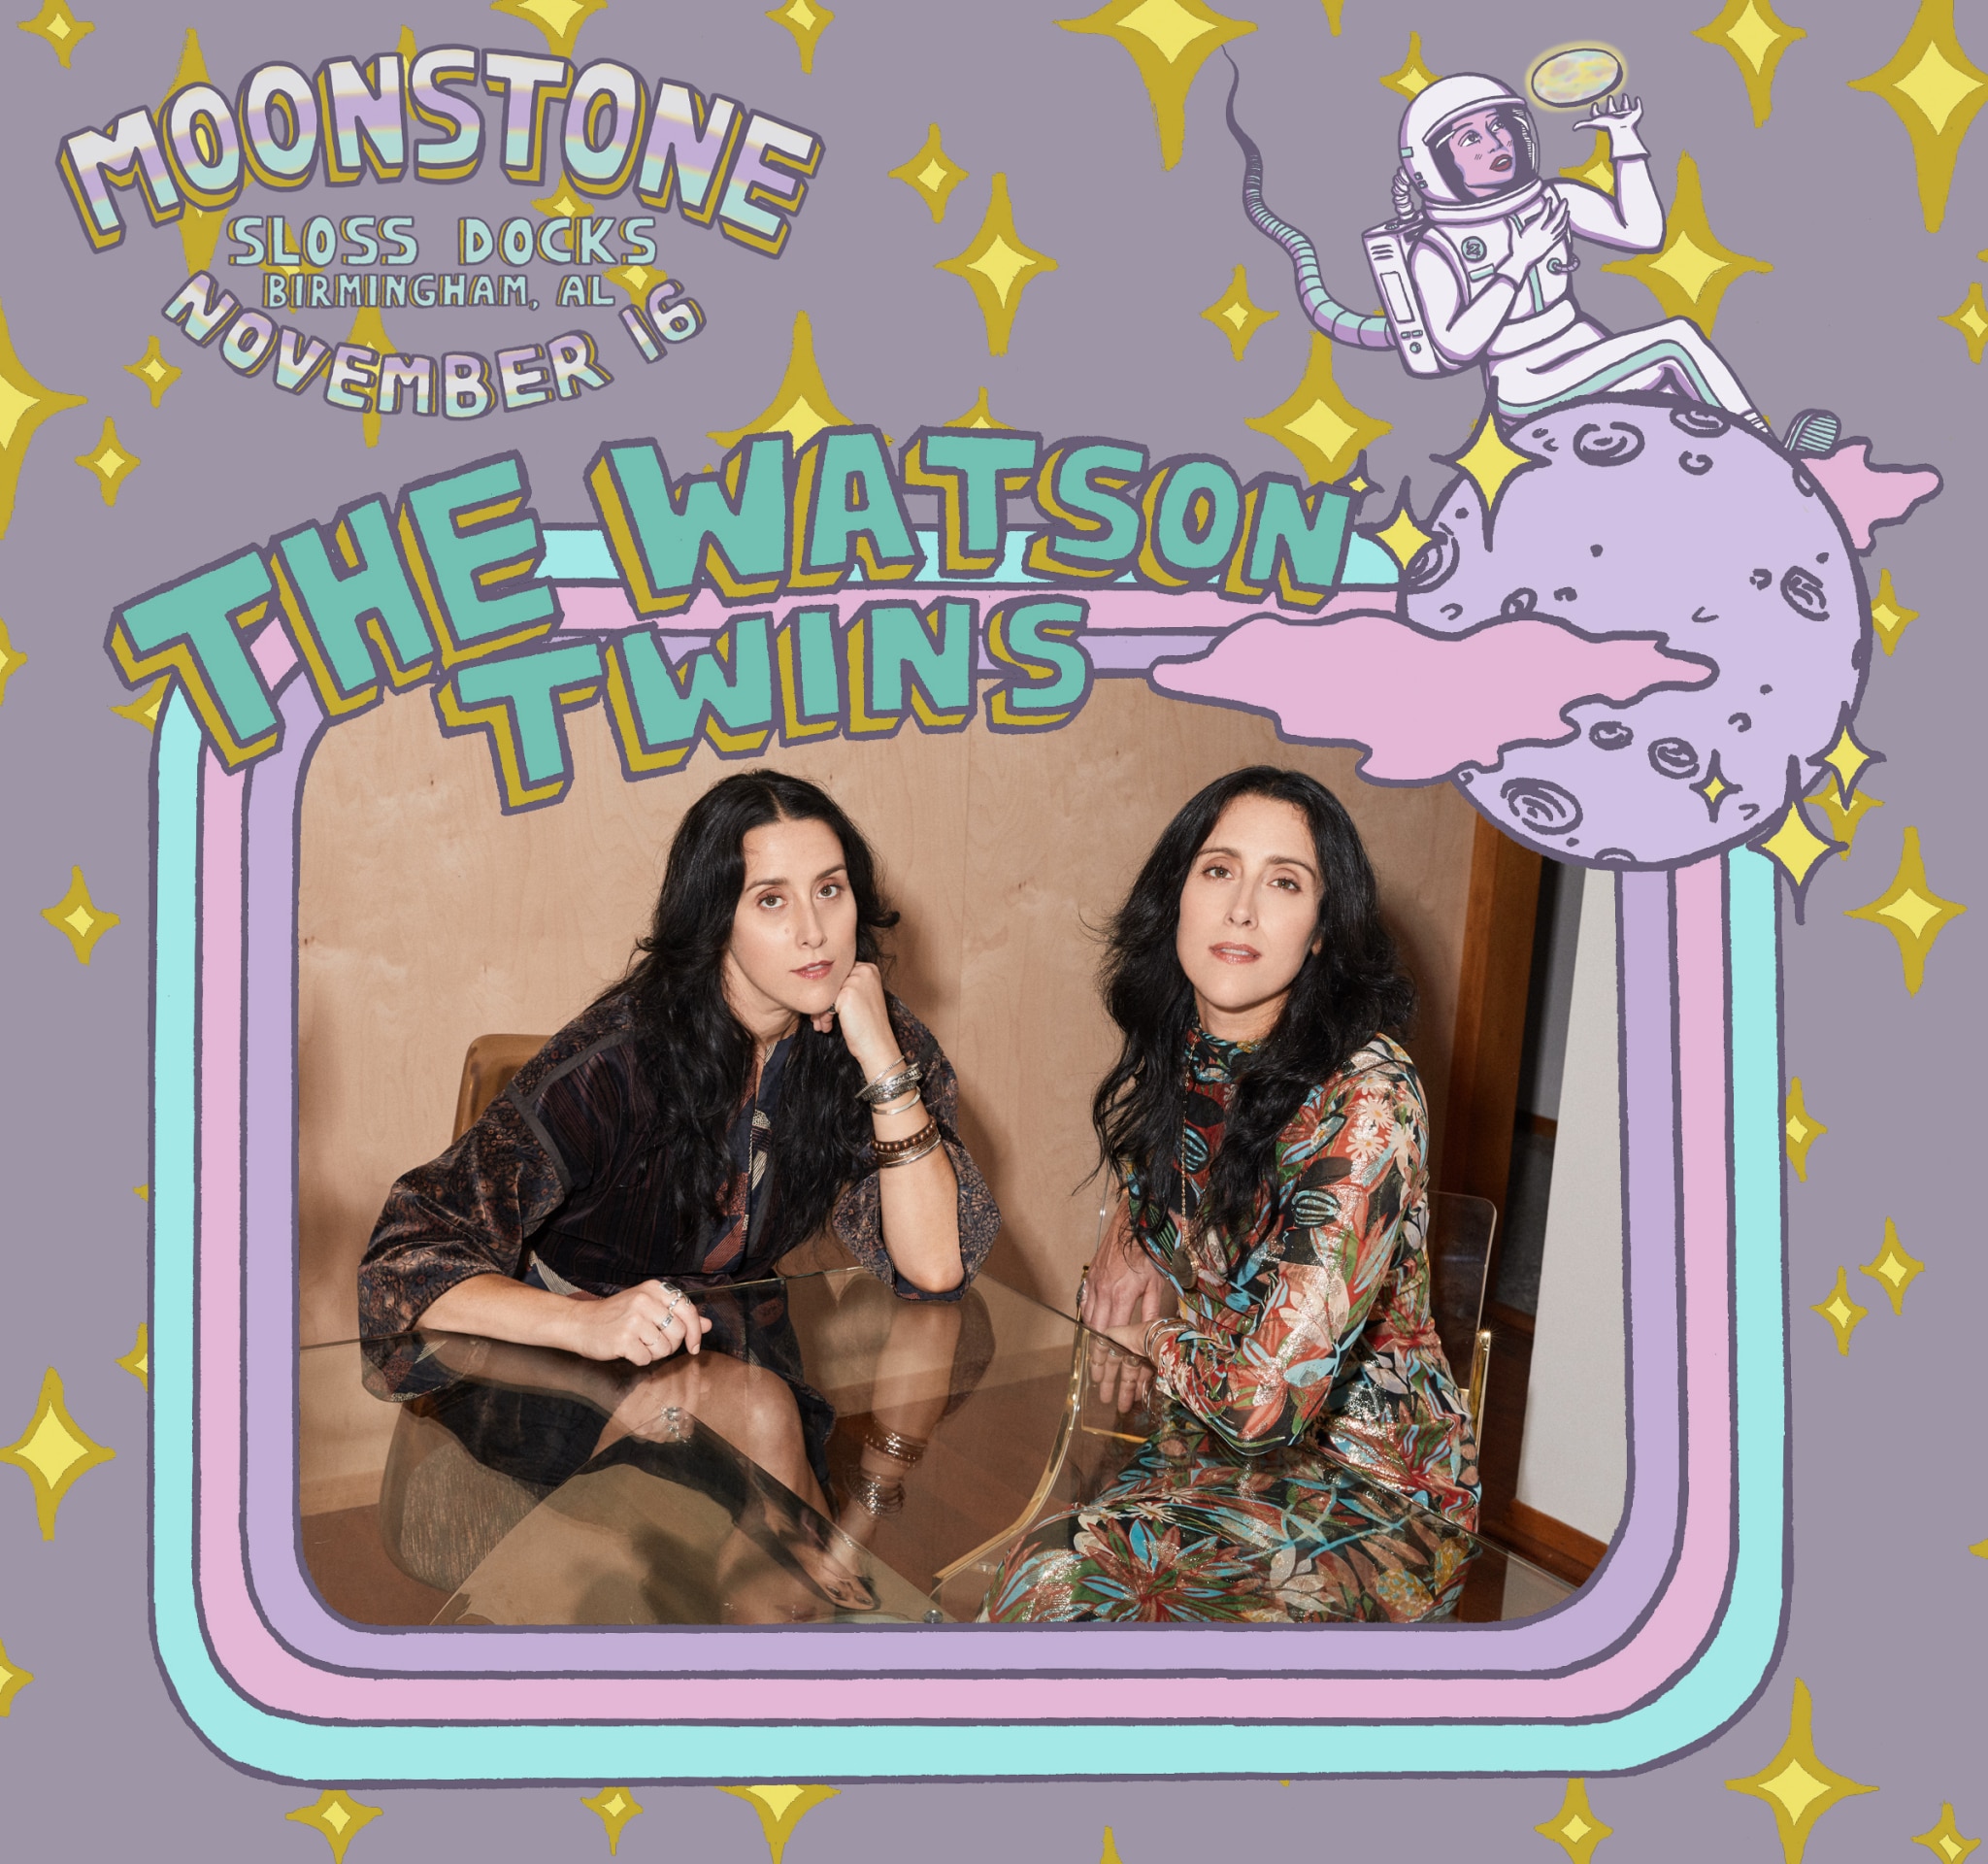 thewatsontwins annouce Moonstone Festival, a female focused music and arts fest, happening Nov. 16th at Sloss Docks. Win VIP tickets!